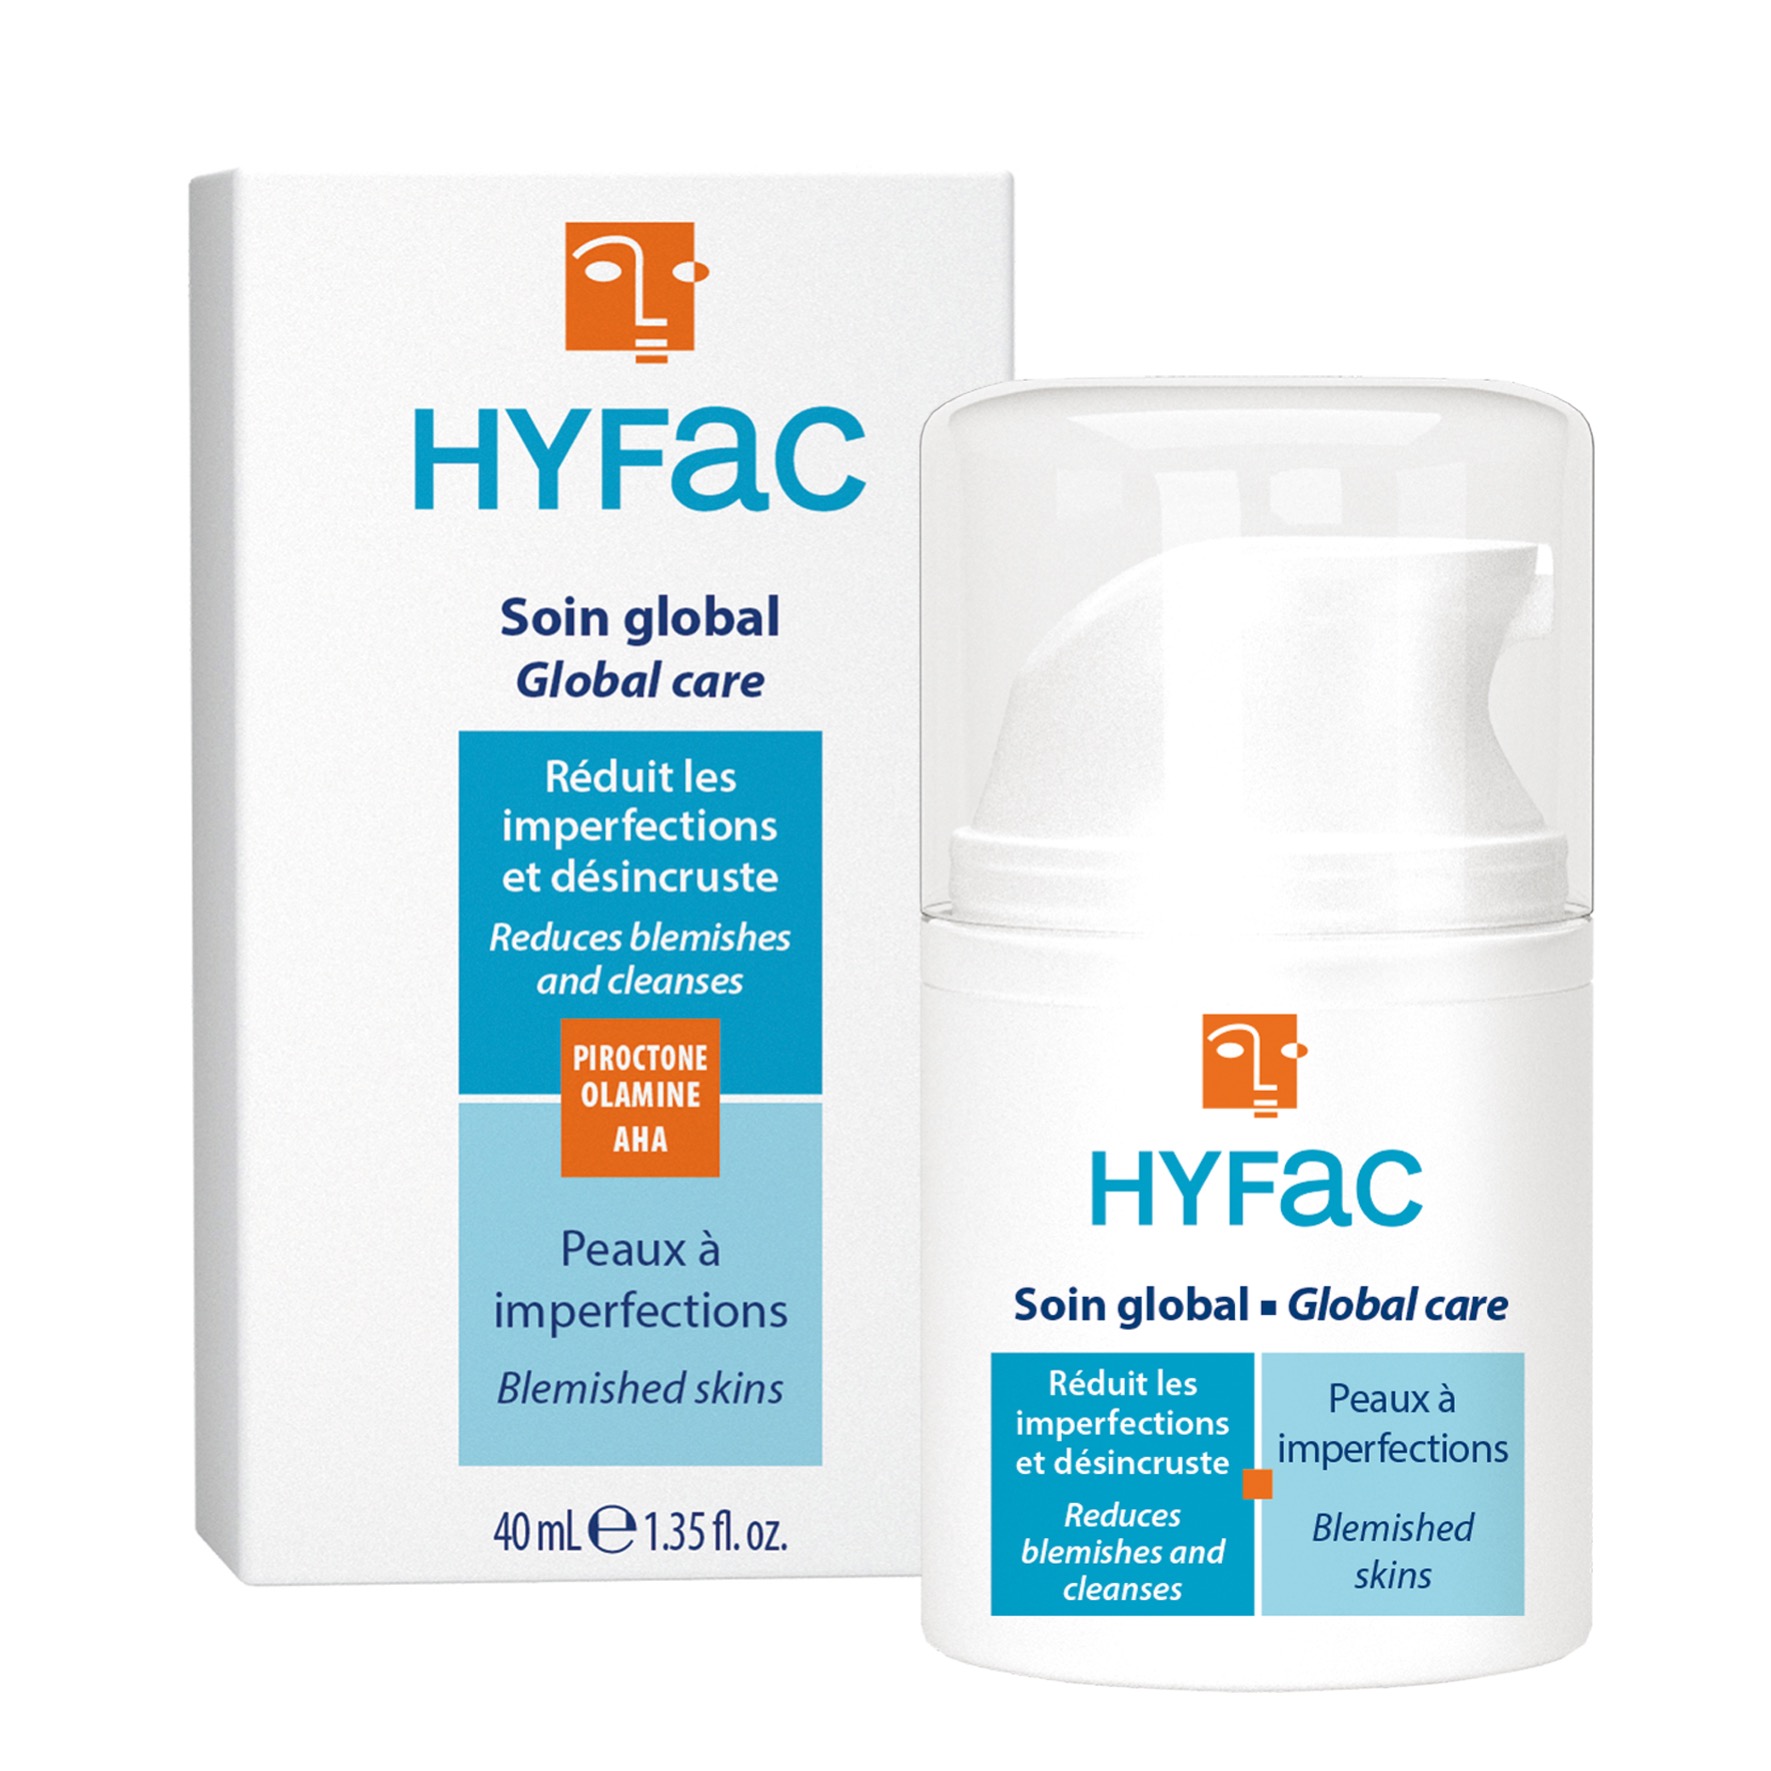 HYFAC Global Anti-Imperfection Care moisturizes and purifies